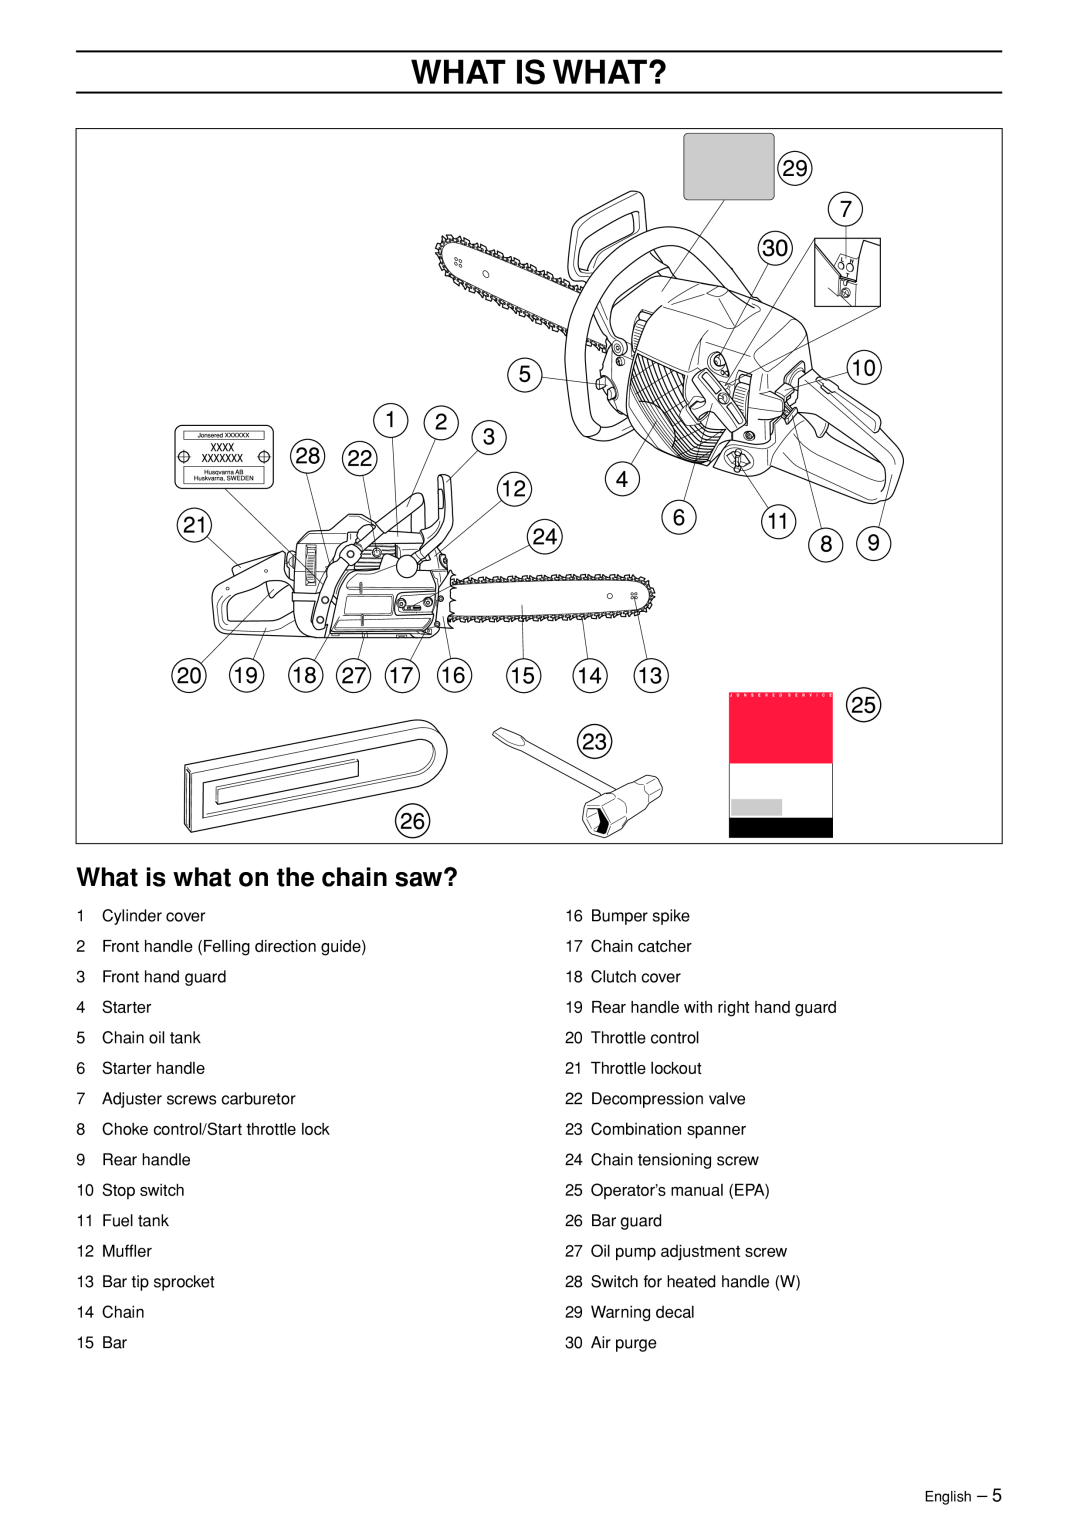 Jonsered CS 2153 manual What Is What?, What is what on the chain saw? 